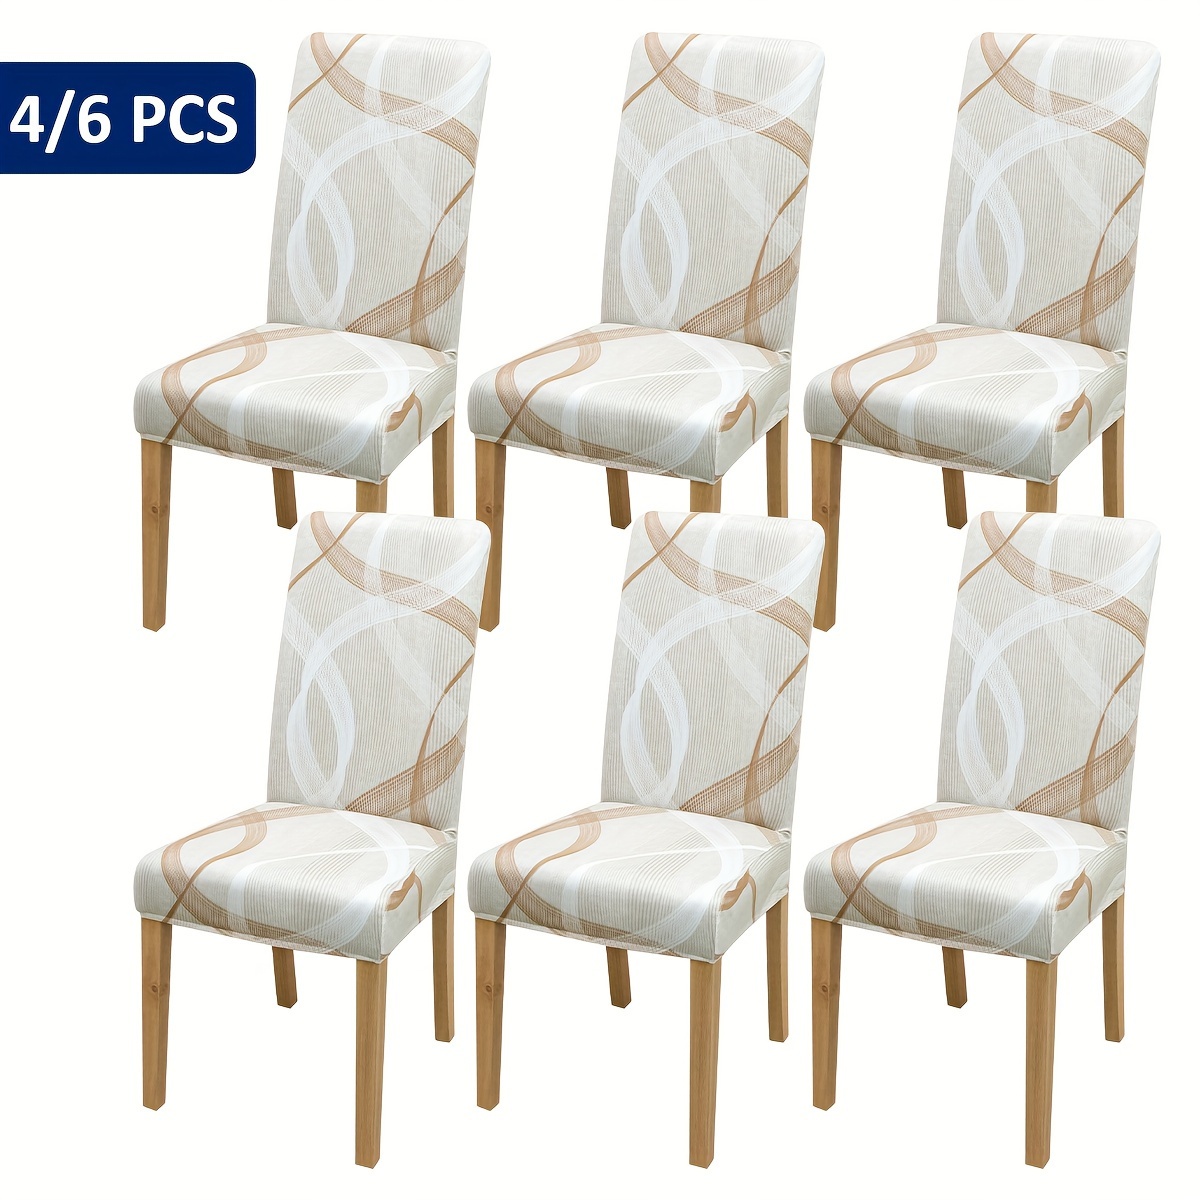 

4/6pcs Stretch Dining Chair Slipcovers, Beige Geometric Pattern, Elastic Slipcovers, Furniture Protector For Home Decor, Classic Style For Kitchen And Living Room, Fits 15-17in Chair Back Width